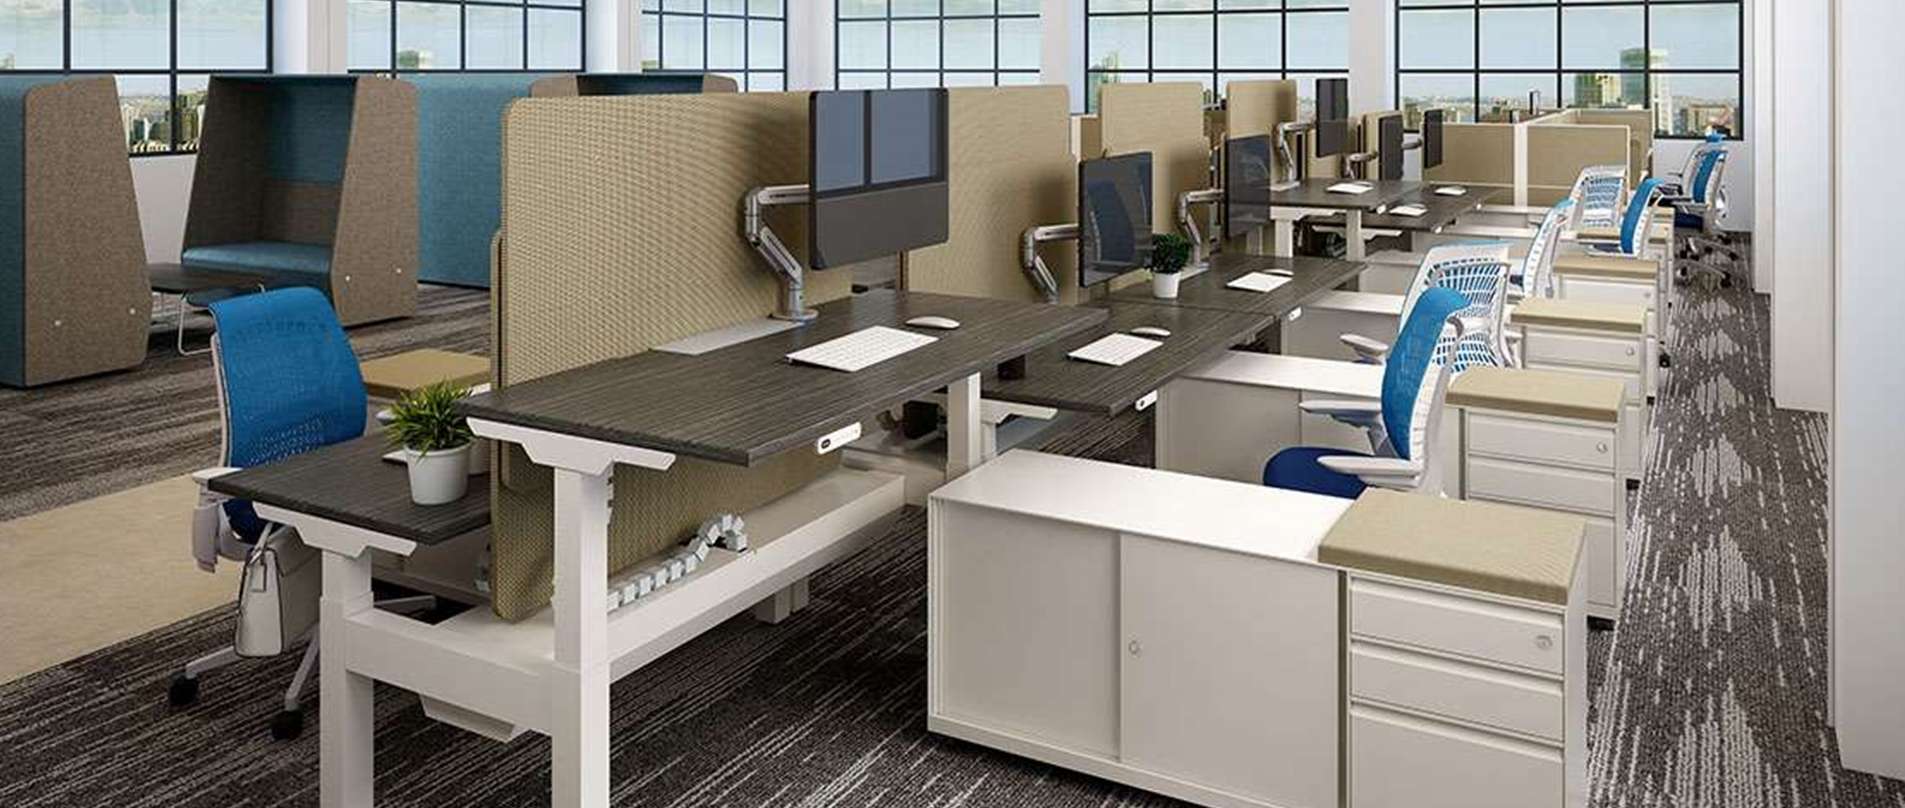 Avail Height Adjustable Desk | Lamex Office Furniture | Official Website of  Lamex